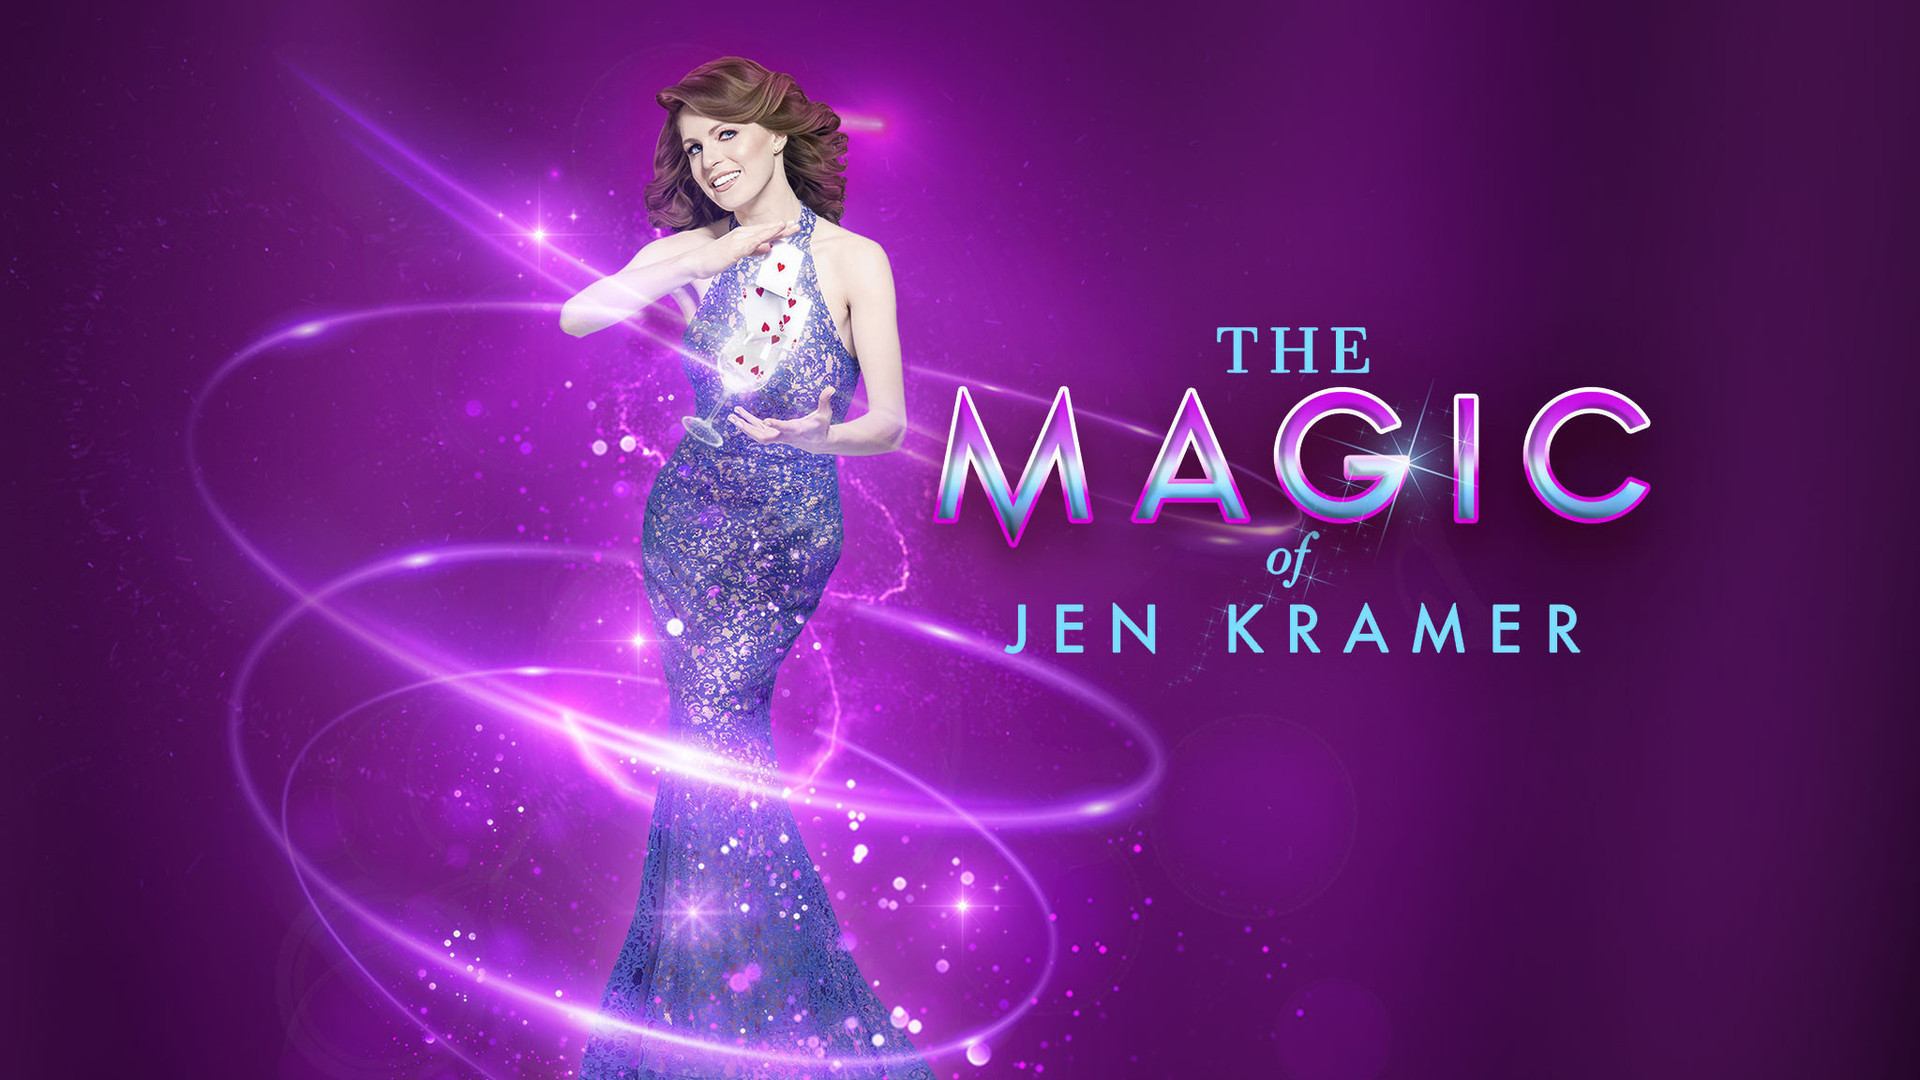 Westgate Las Vegas and The Magic of Jen Kramer Announce Residency Extension